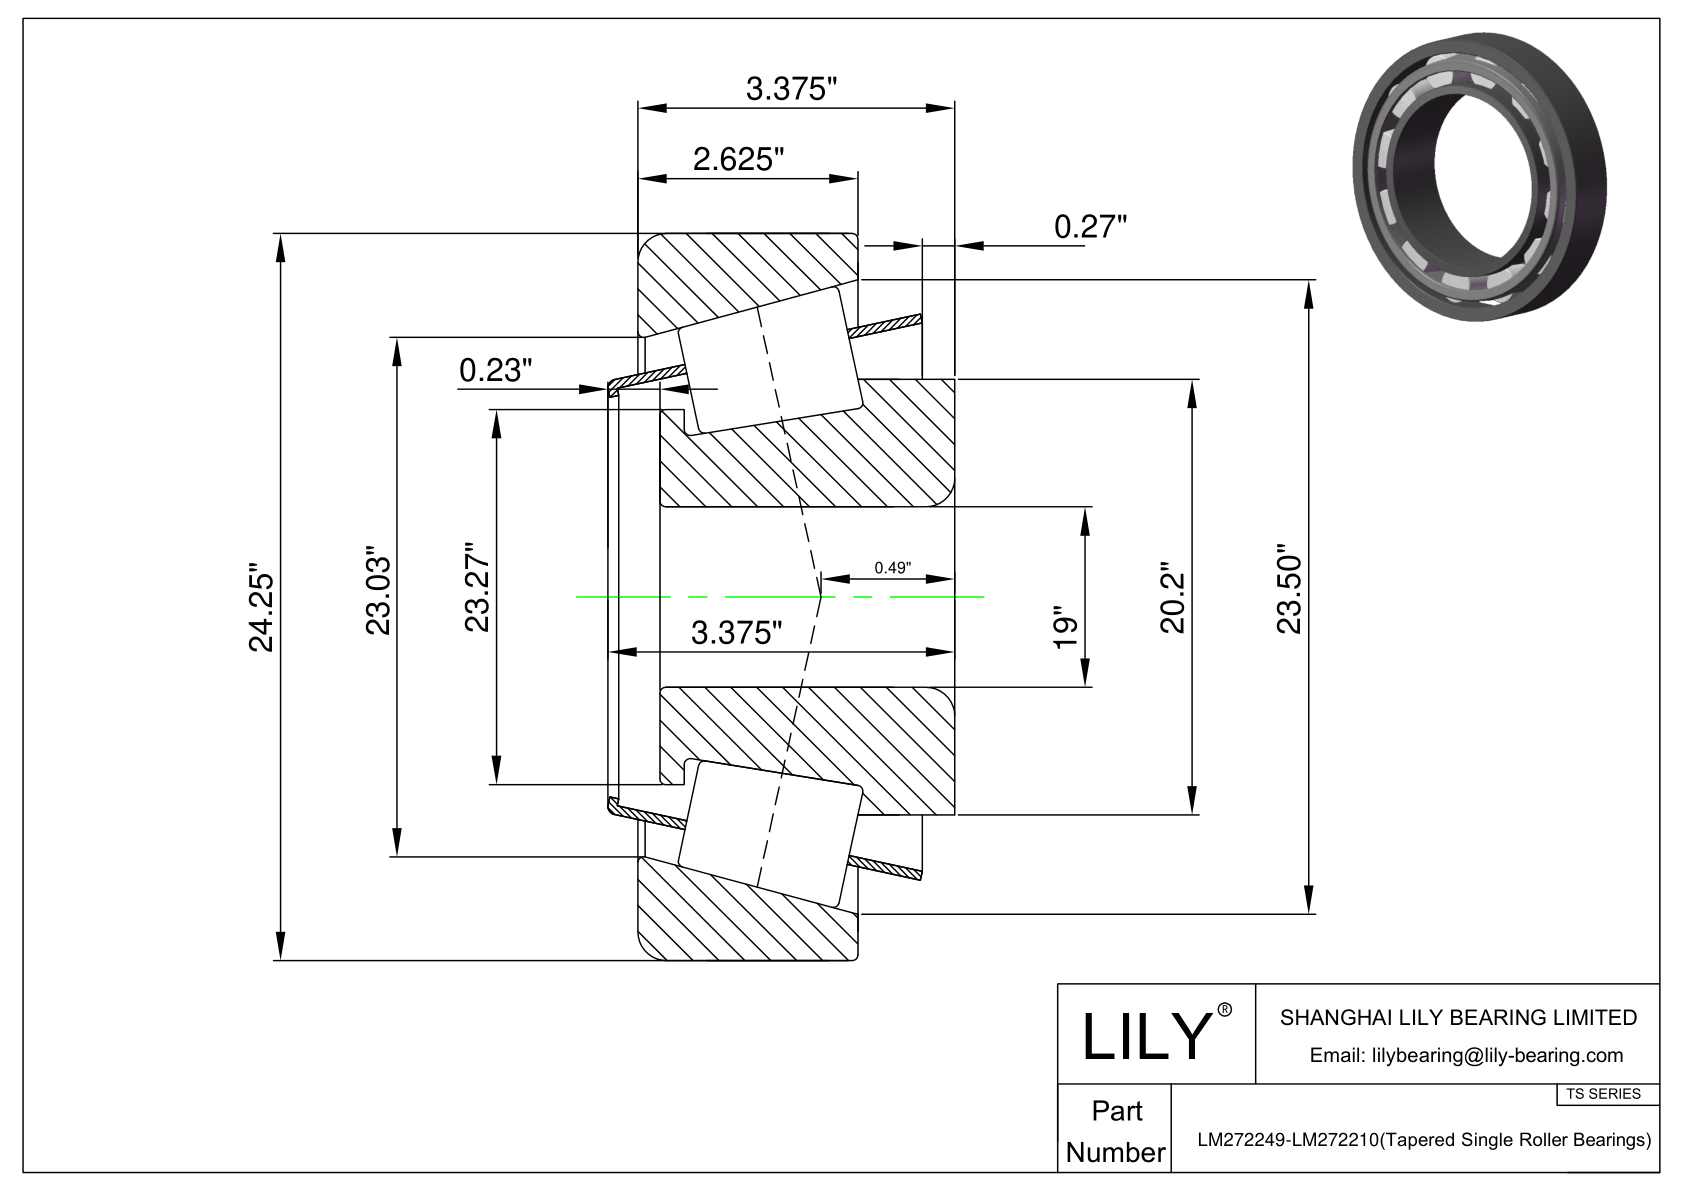 LM272249-LM272210 TS (Tapered Single Roller Bearings) (Imperial) cad drawing